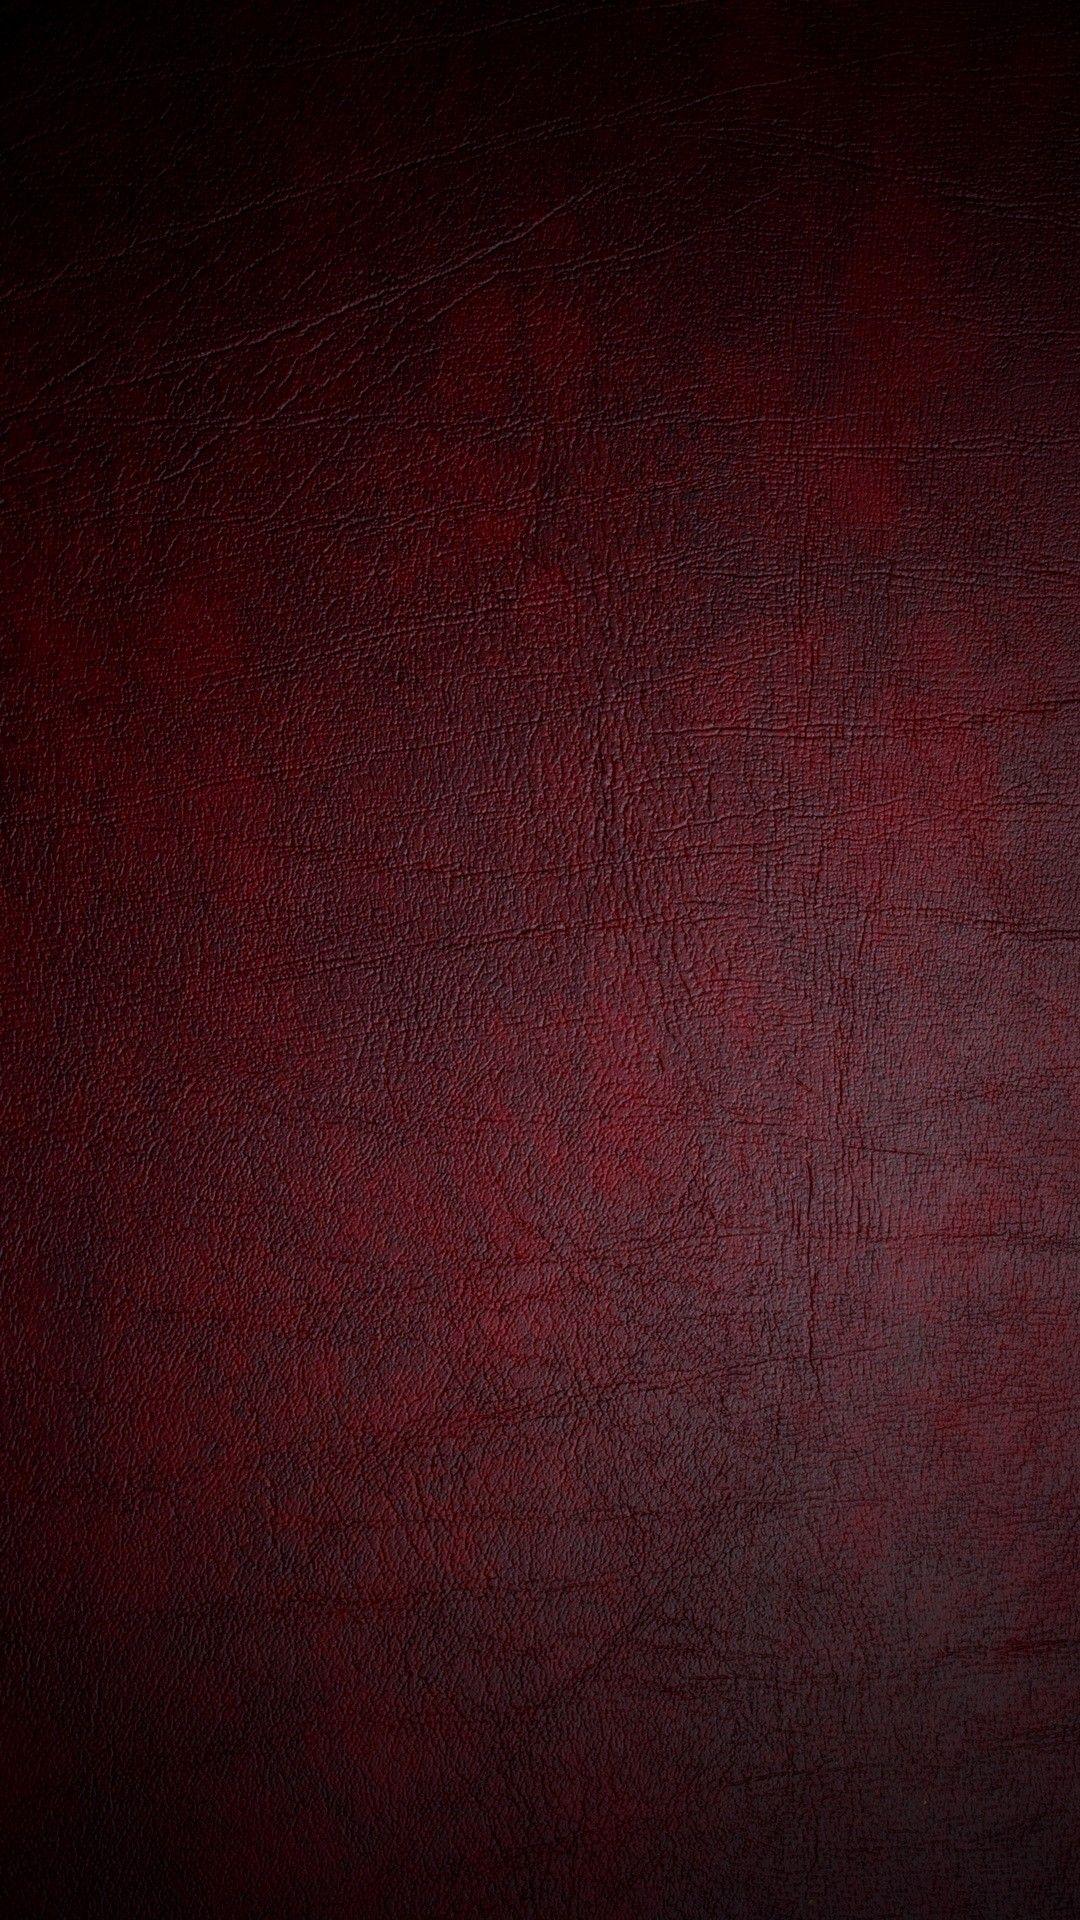 Leather Red Wallpaper - [1080x1920]